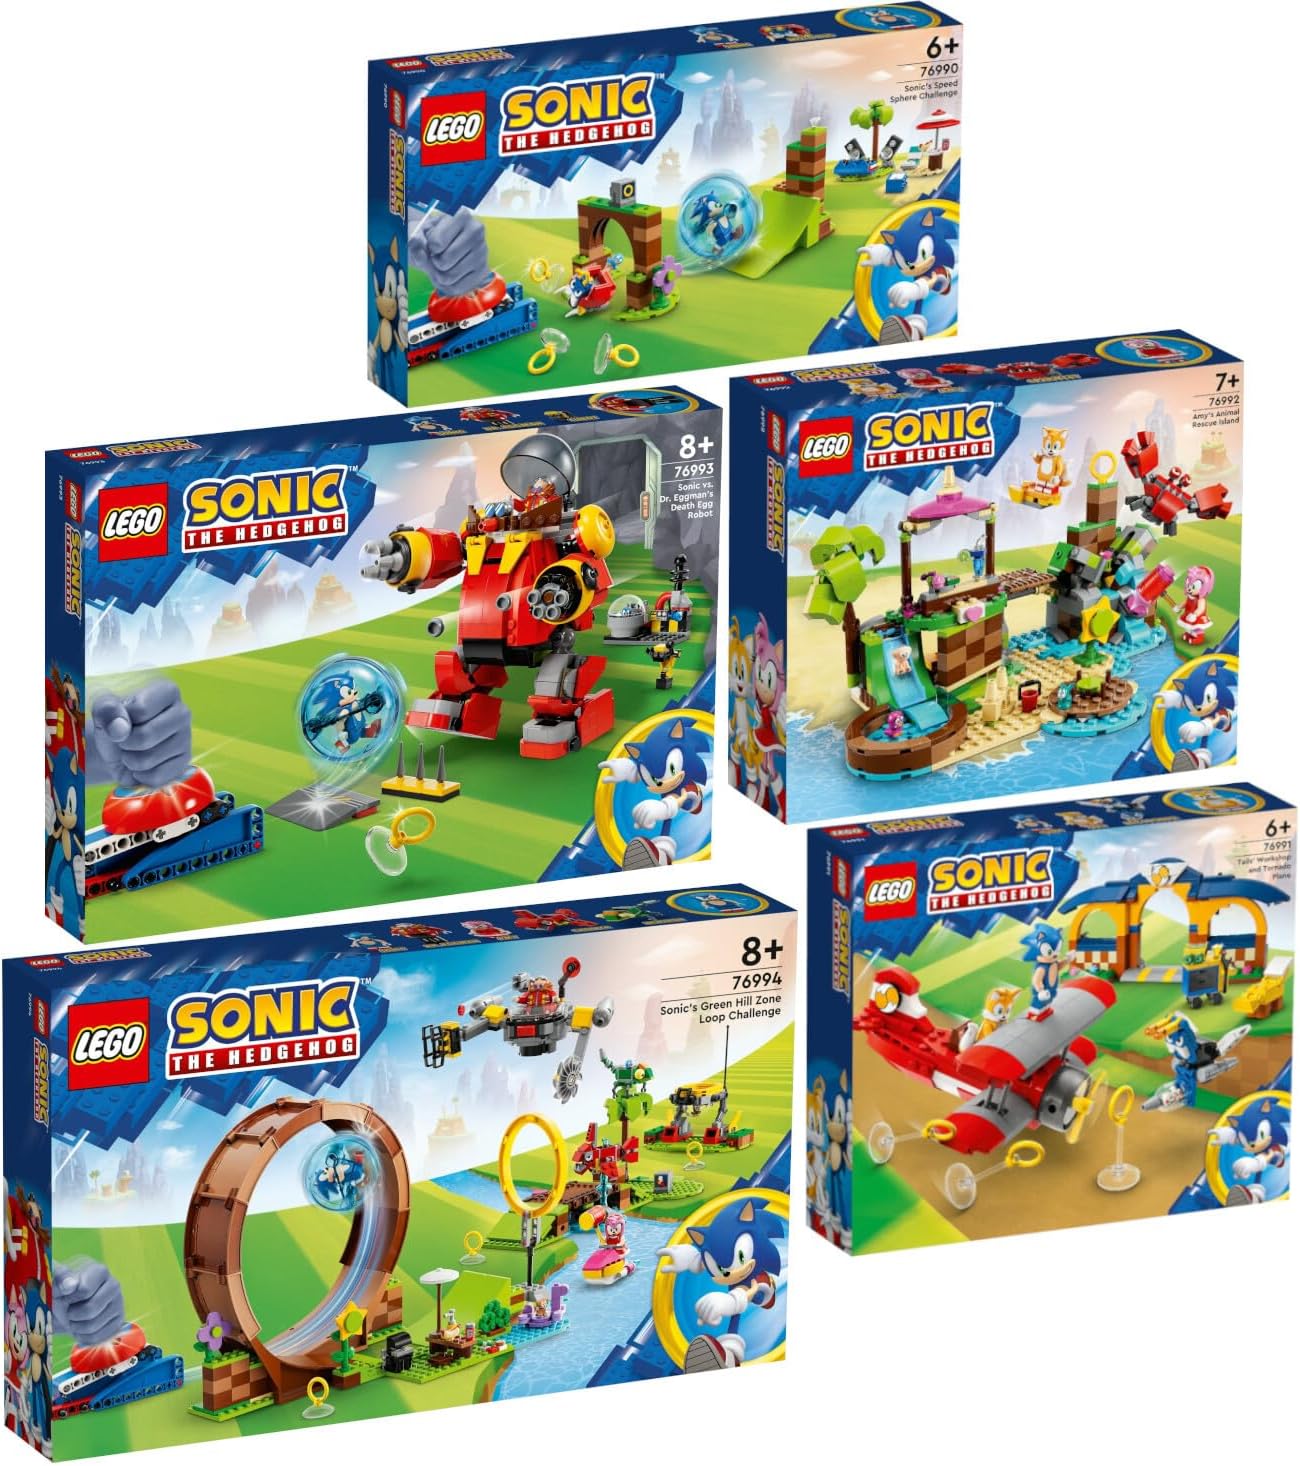 Lego Sonic Set of 5: 76990 Sonics Ball Challenge, 76991Tails Tornado Flyer with Workshop, 76992 Amys Animal Rescue Island, 76993 Sonic vs. Dr. Eggmans & 76994 Sonics Looping Challenge